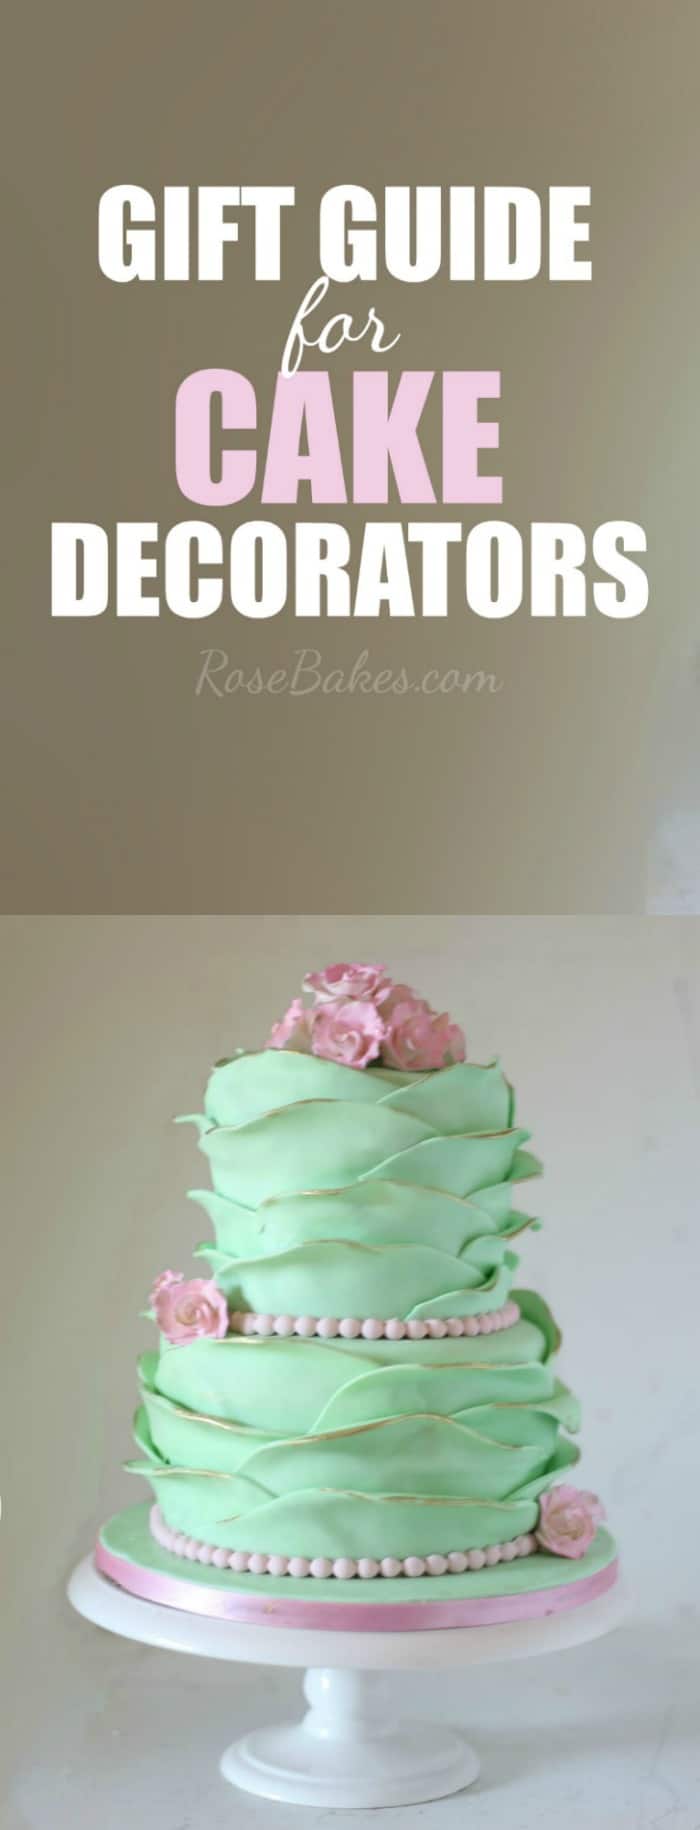 A Gift Guide for Cake Decorators - 10 great ideas for the cake decorator in your life. Gifts for every budget!